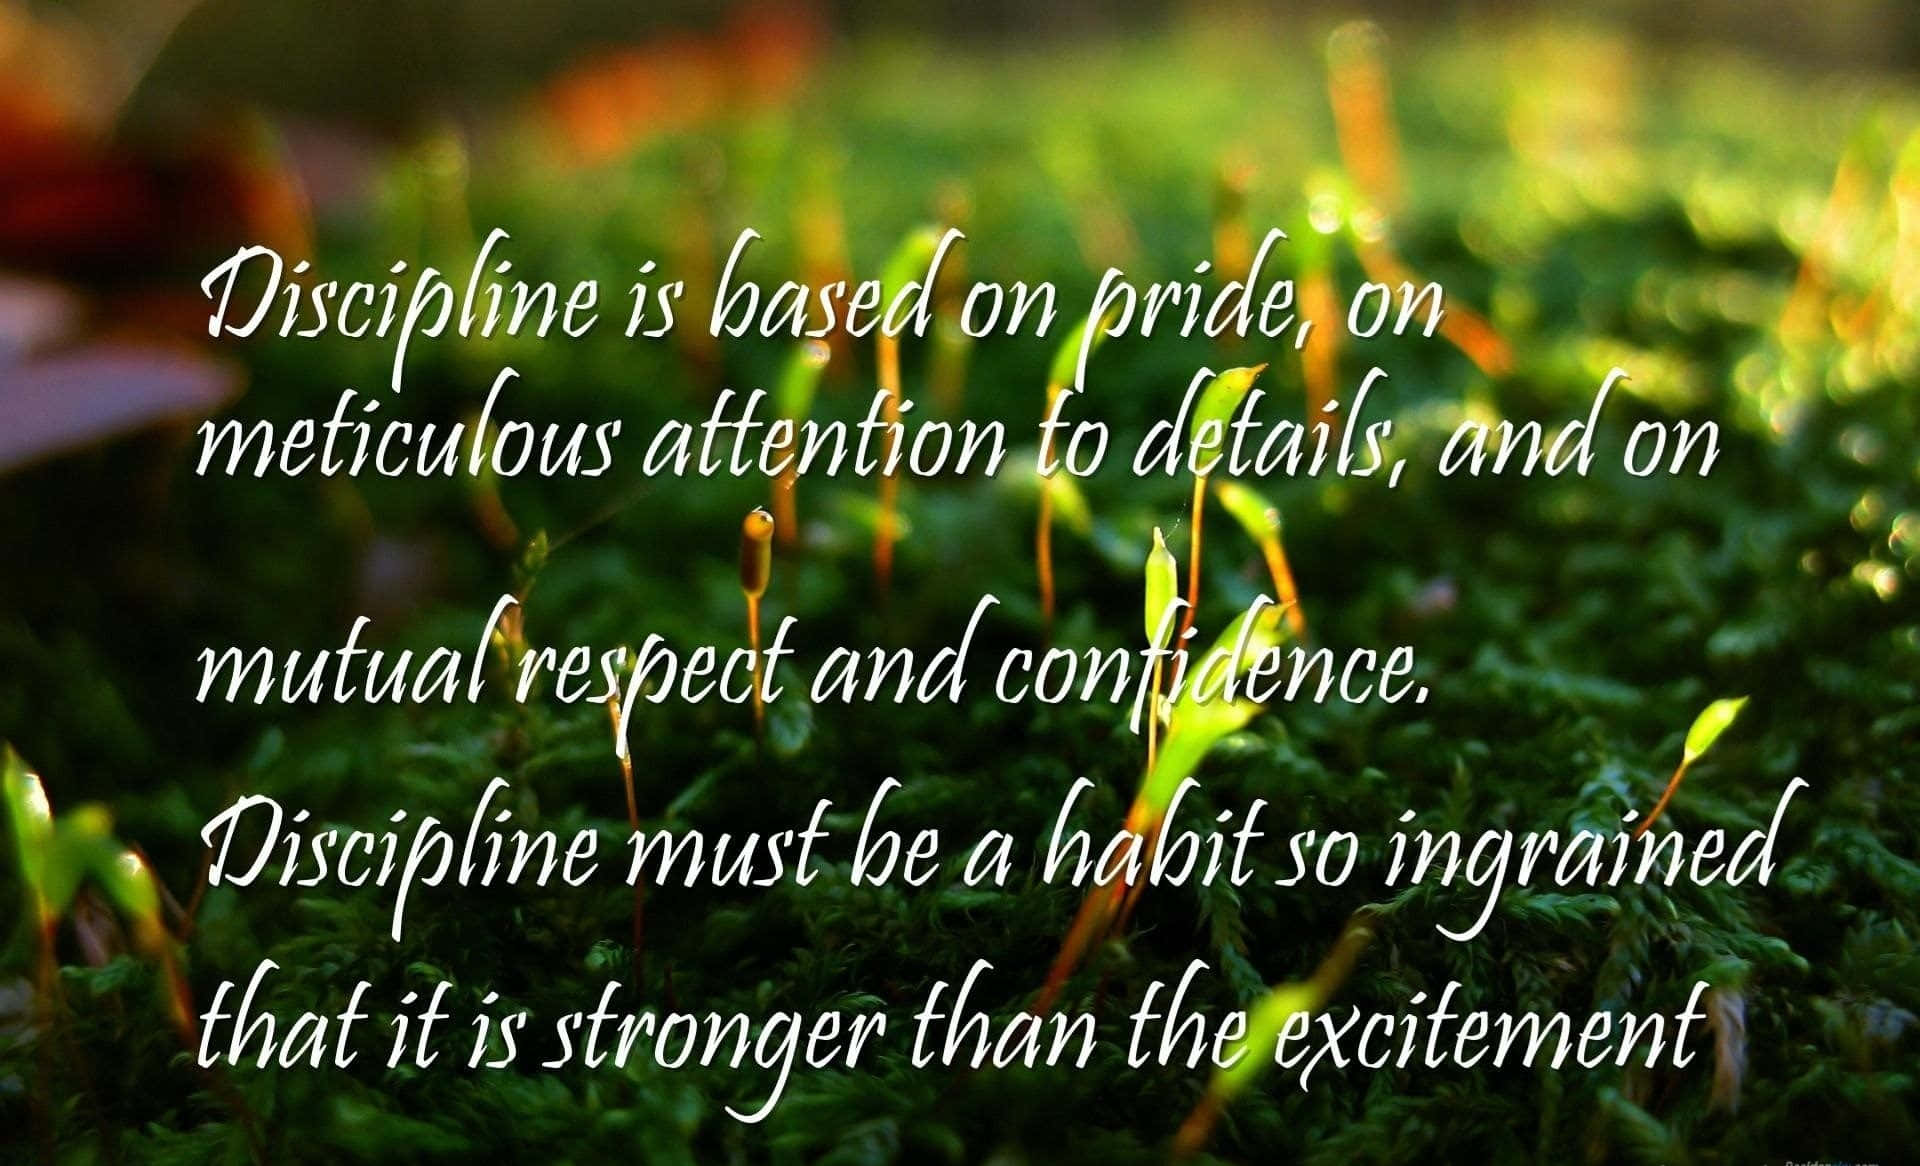 A Quote About Discipline That Says, Discipline Is Based On Pride On Meditative Attention To Detail Wallpaper